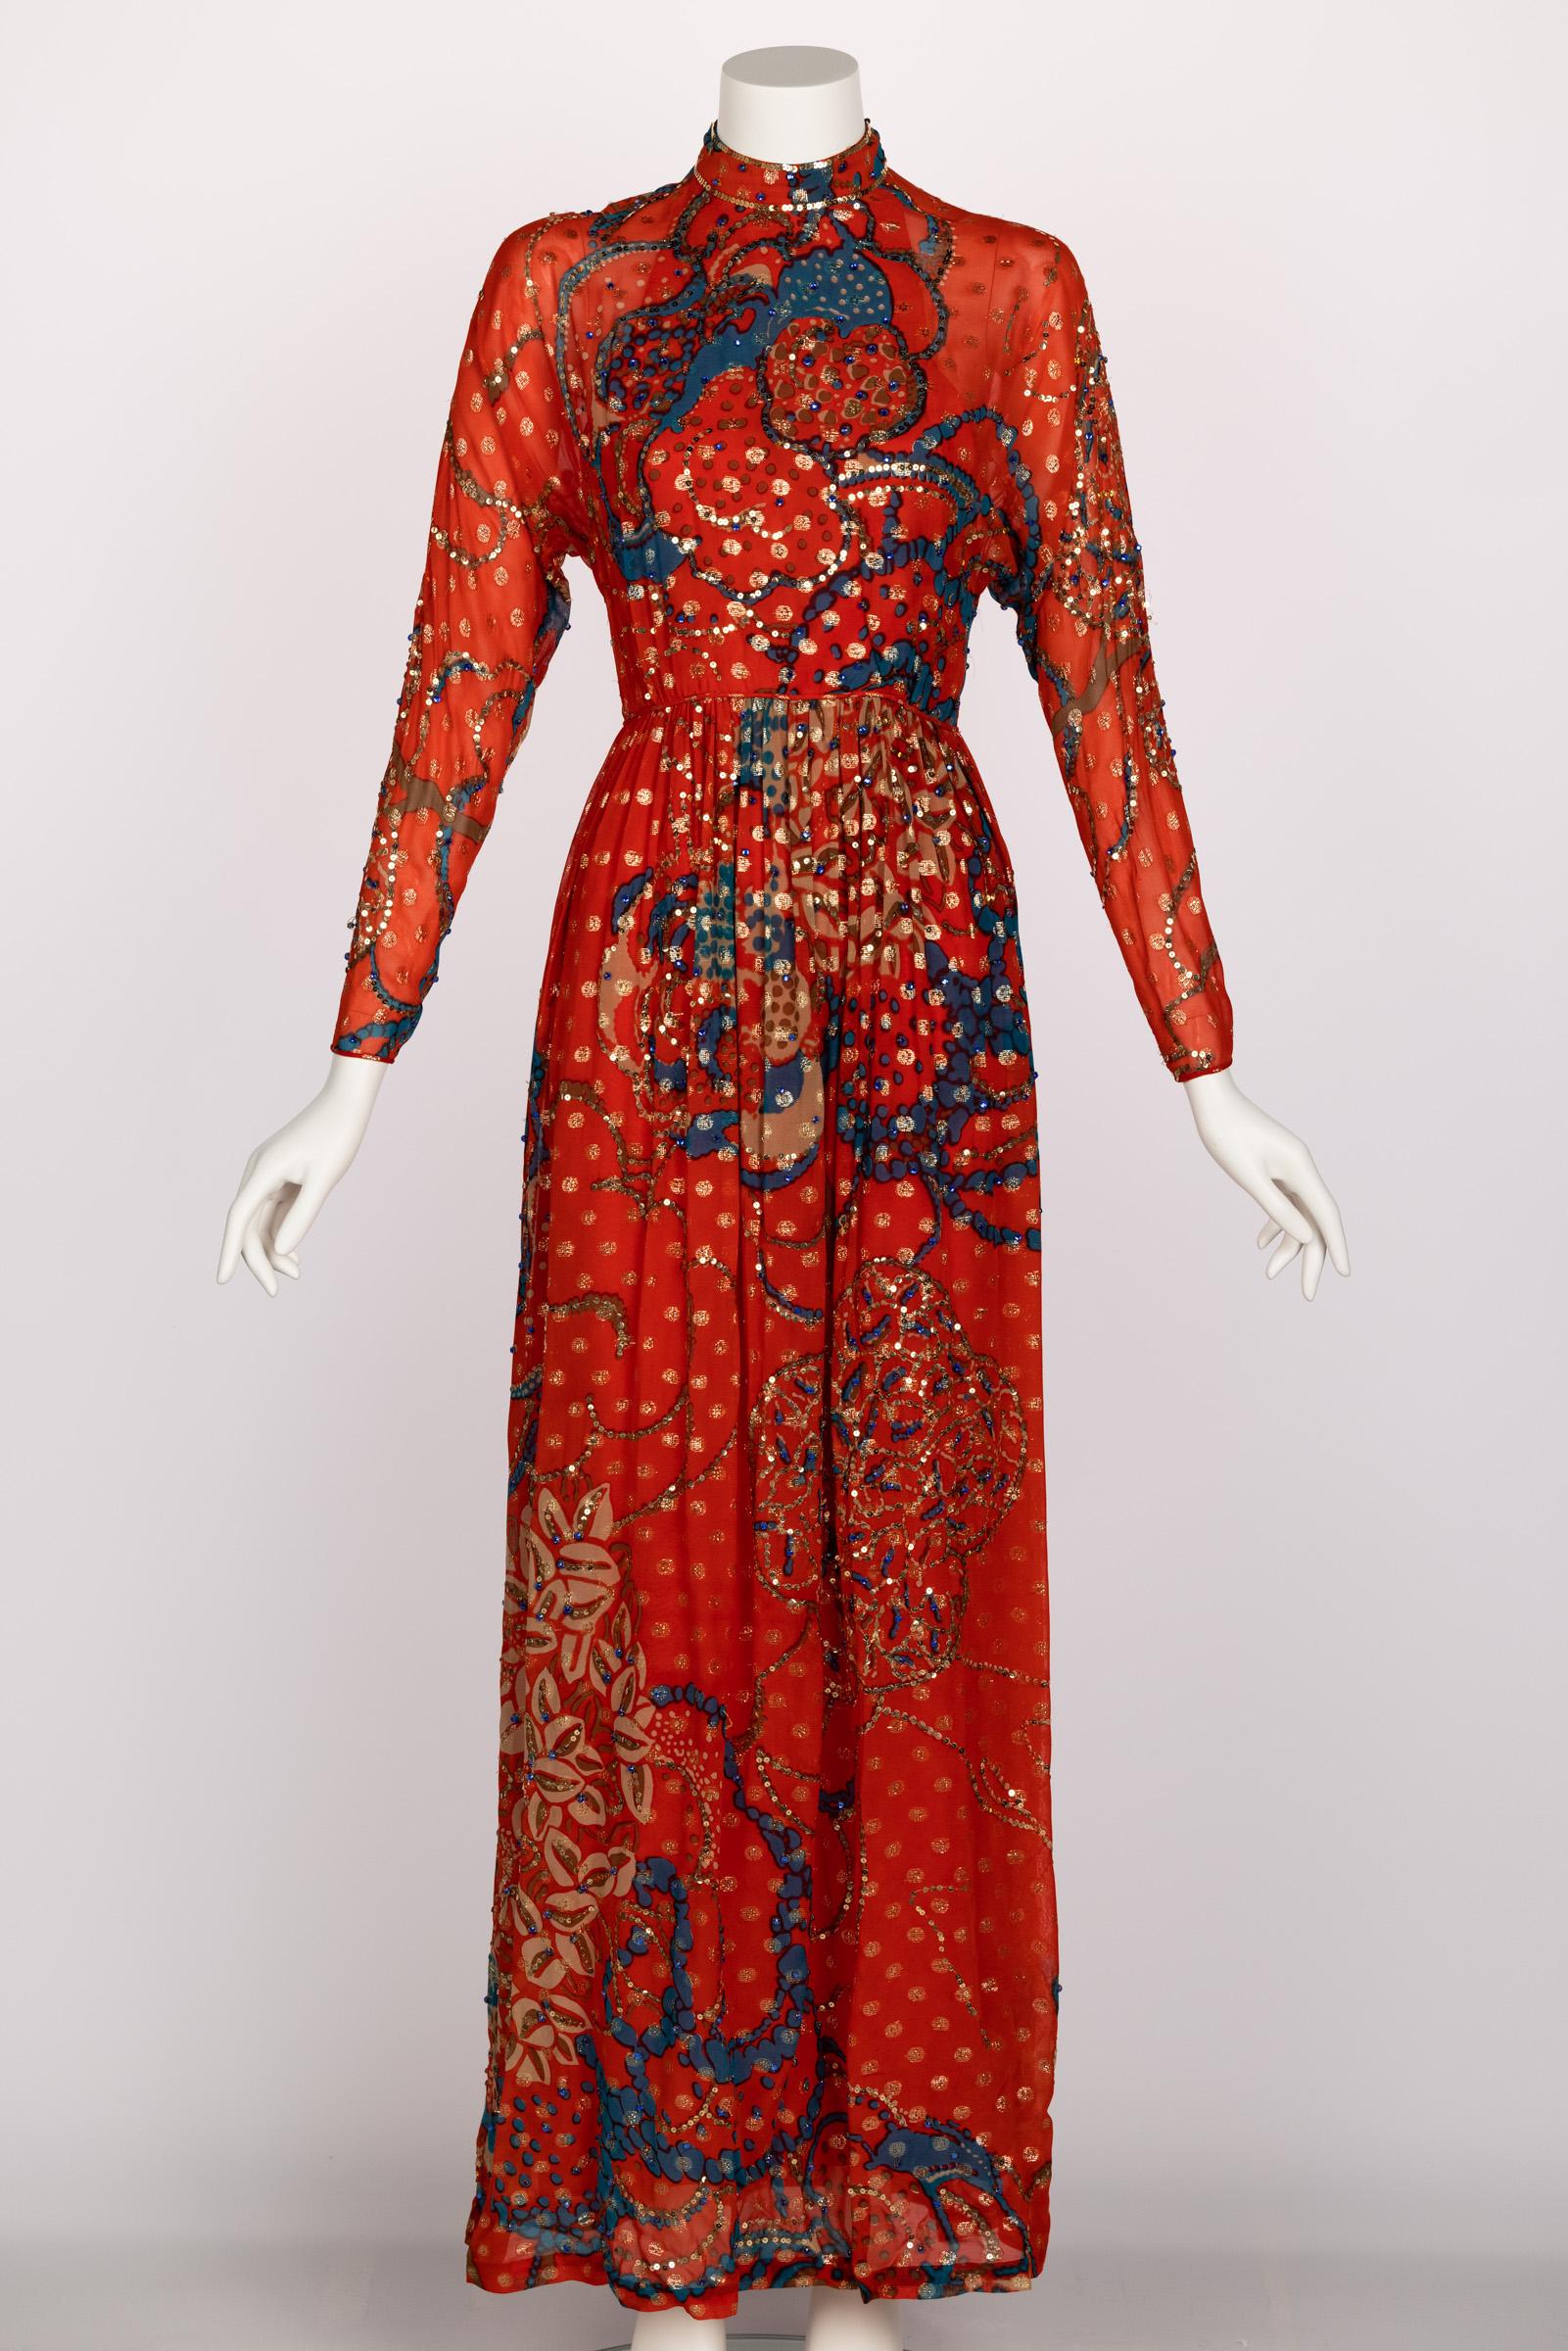 American designer Malcolm Starr made a name for himself in the late 1960s and 1970s, creating elegant dresses that were a heady blend of demure femininity and commanding fashion. Egyptian-born designer Youssef Rizkallah studied in Paris, apprenticed